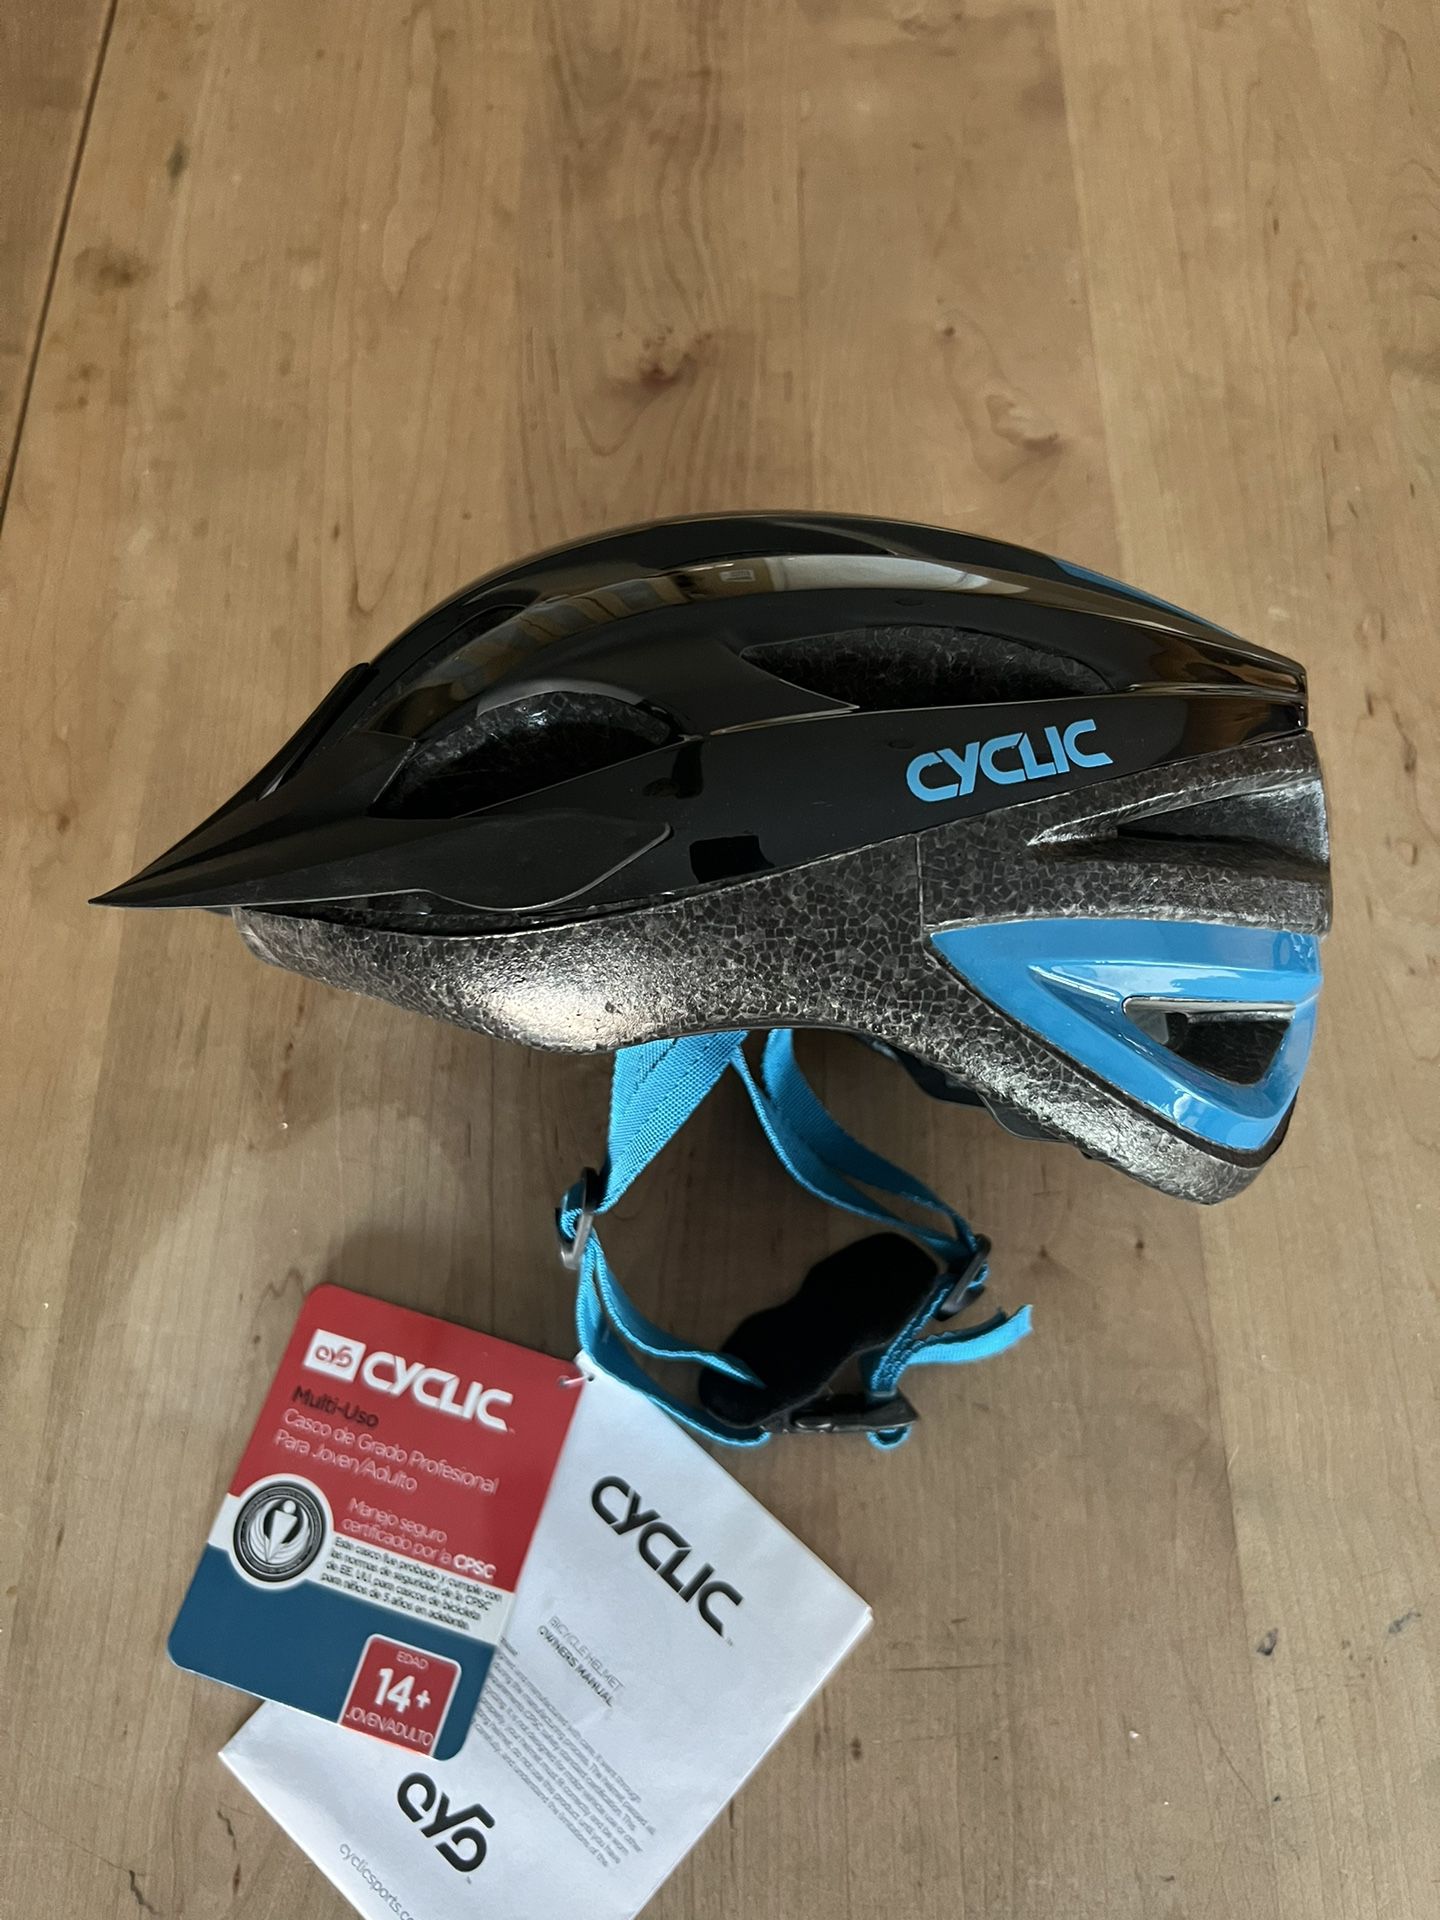 Cyclic Bike Helmet Adult Large New Condition